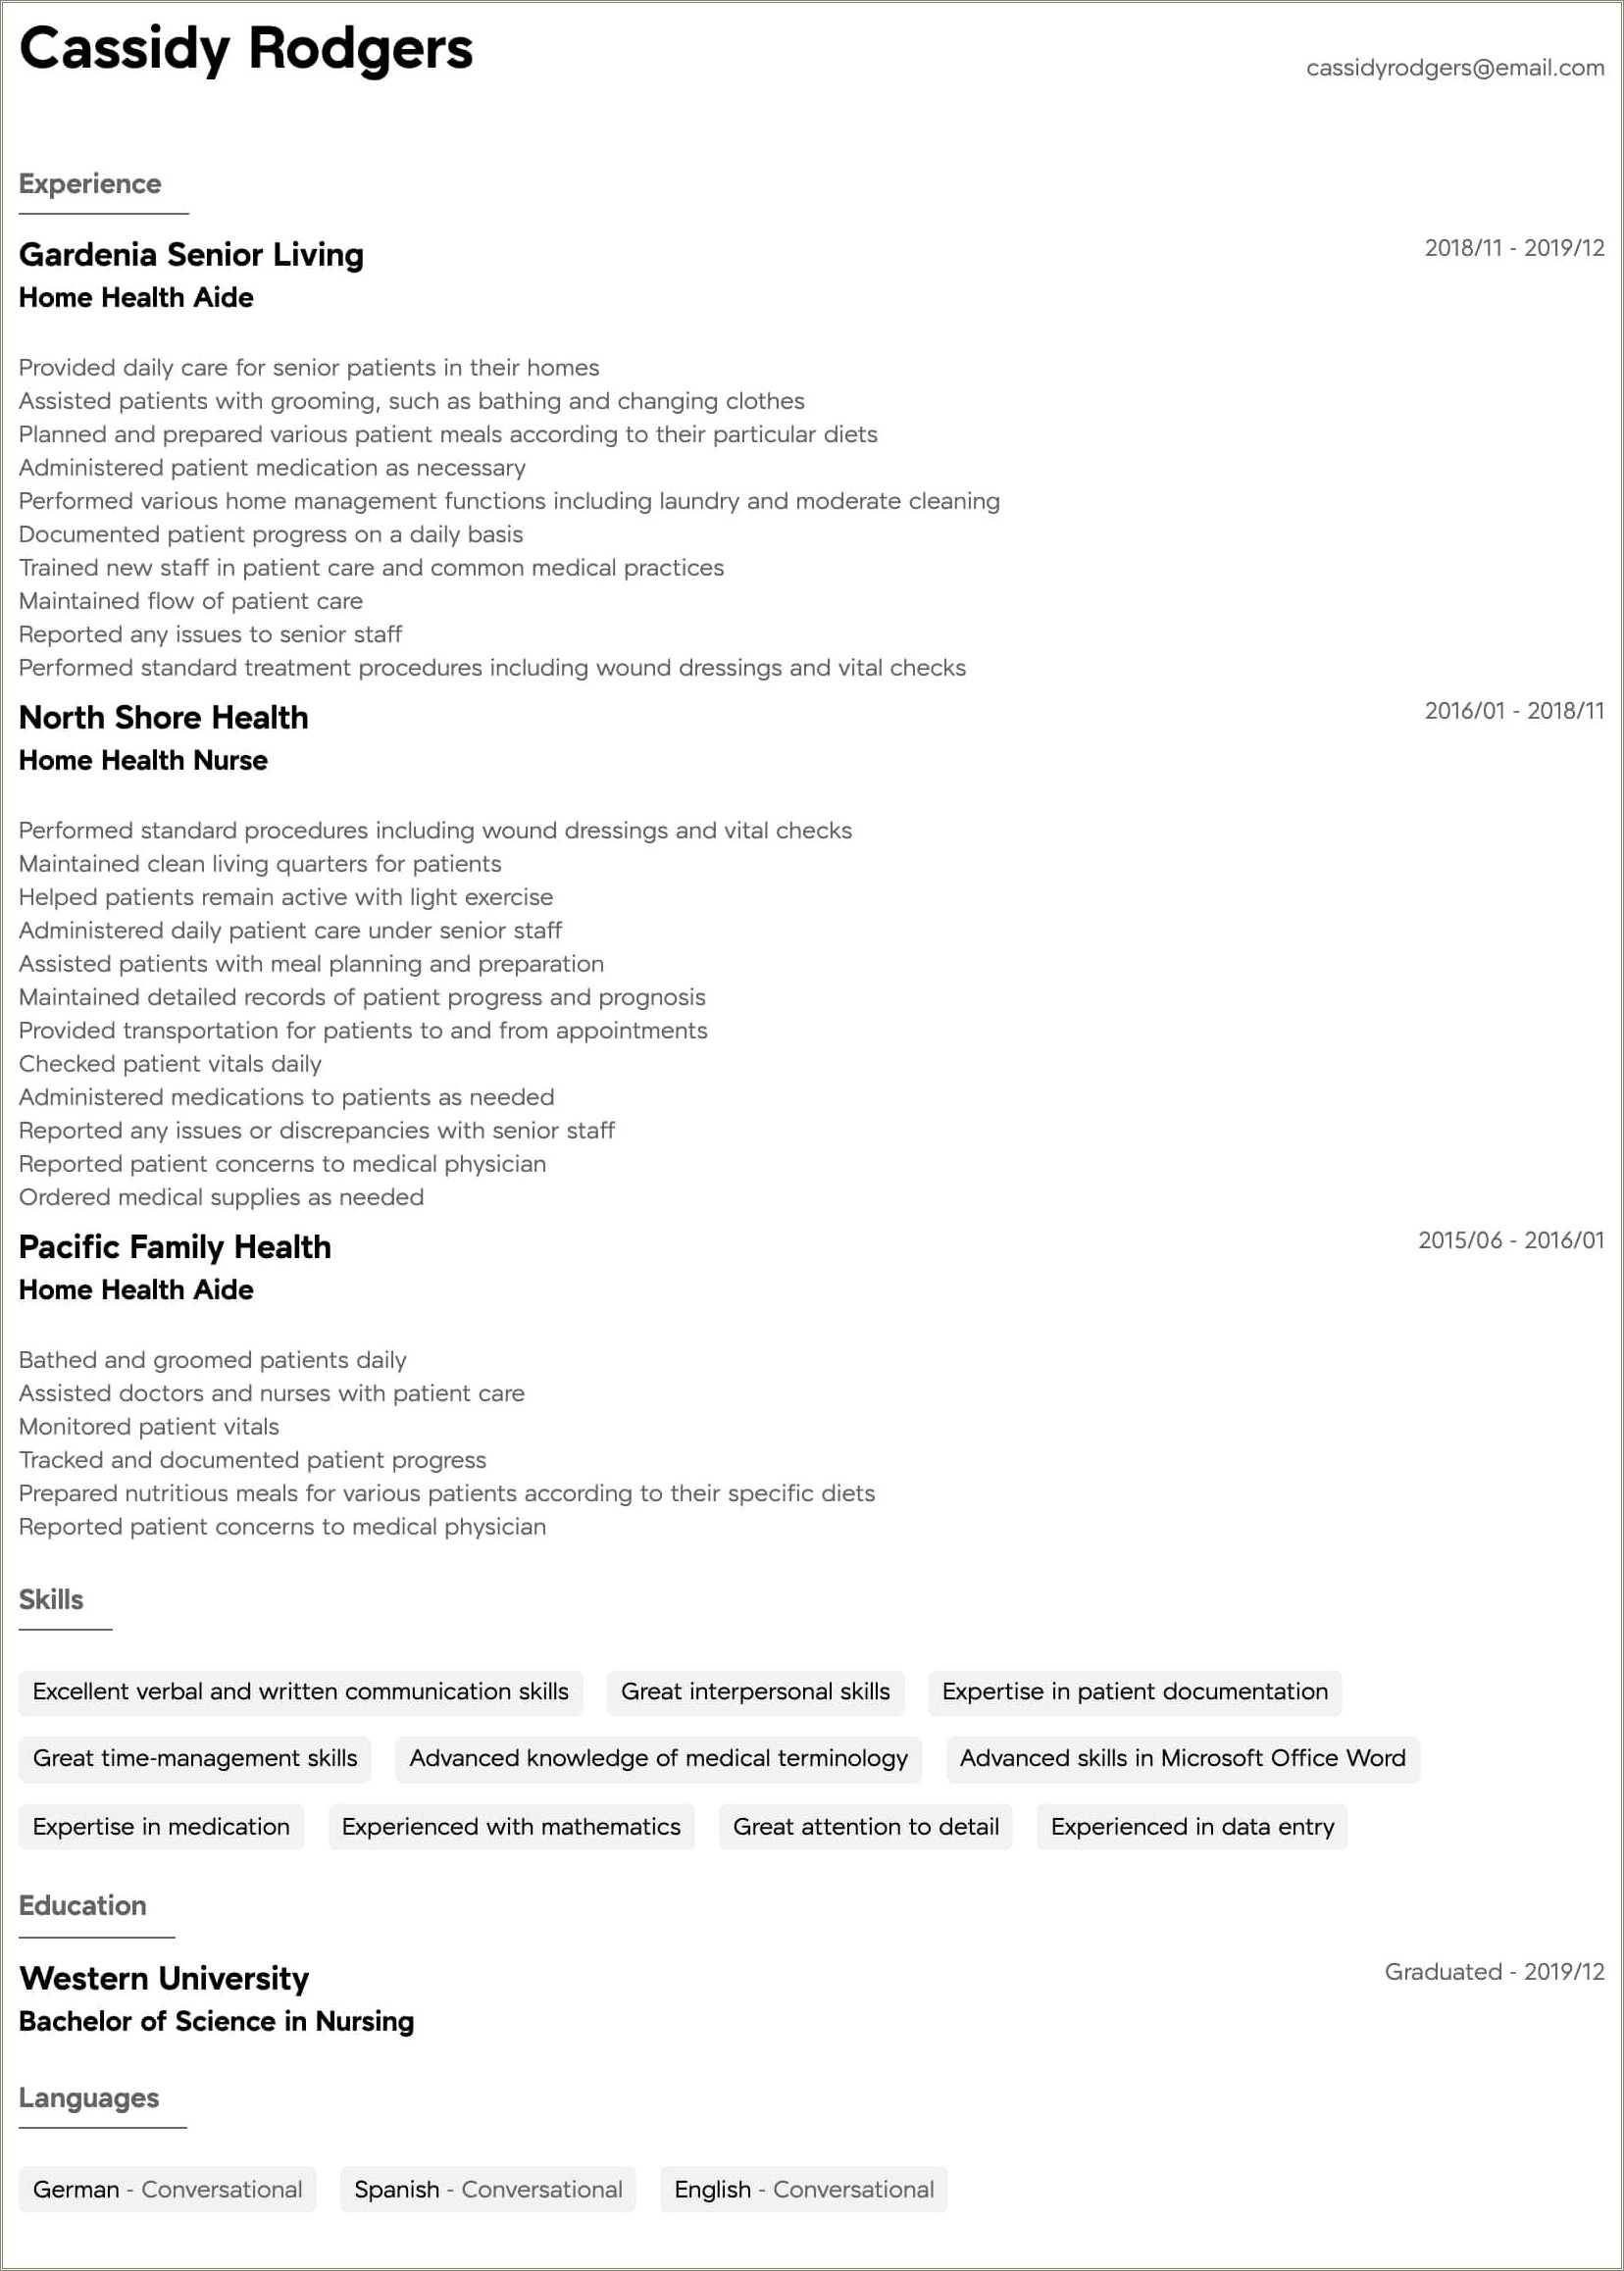 Resume For Home Care Aide Example